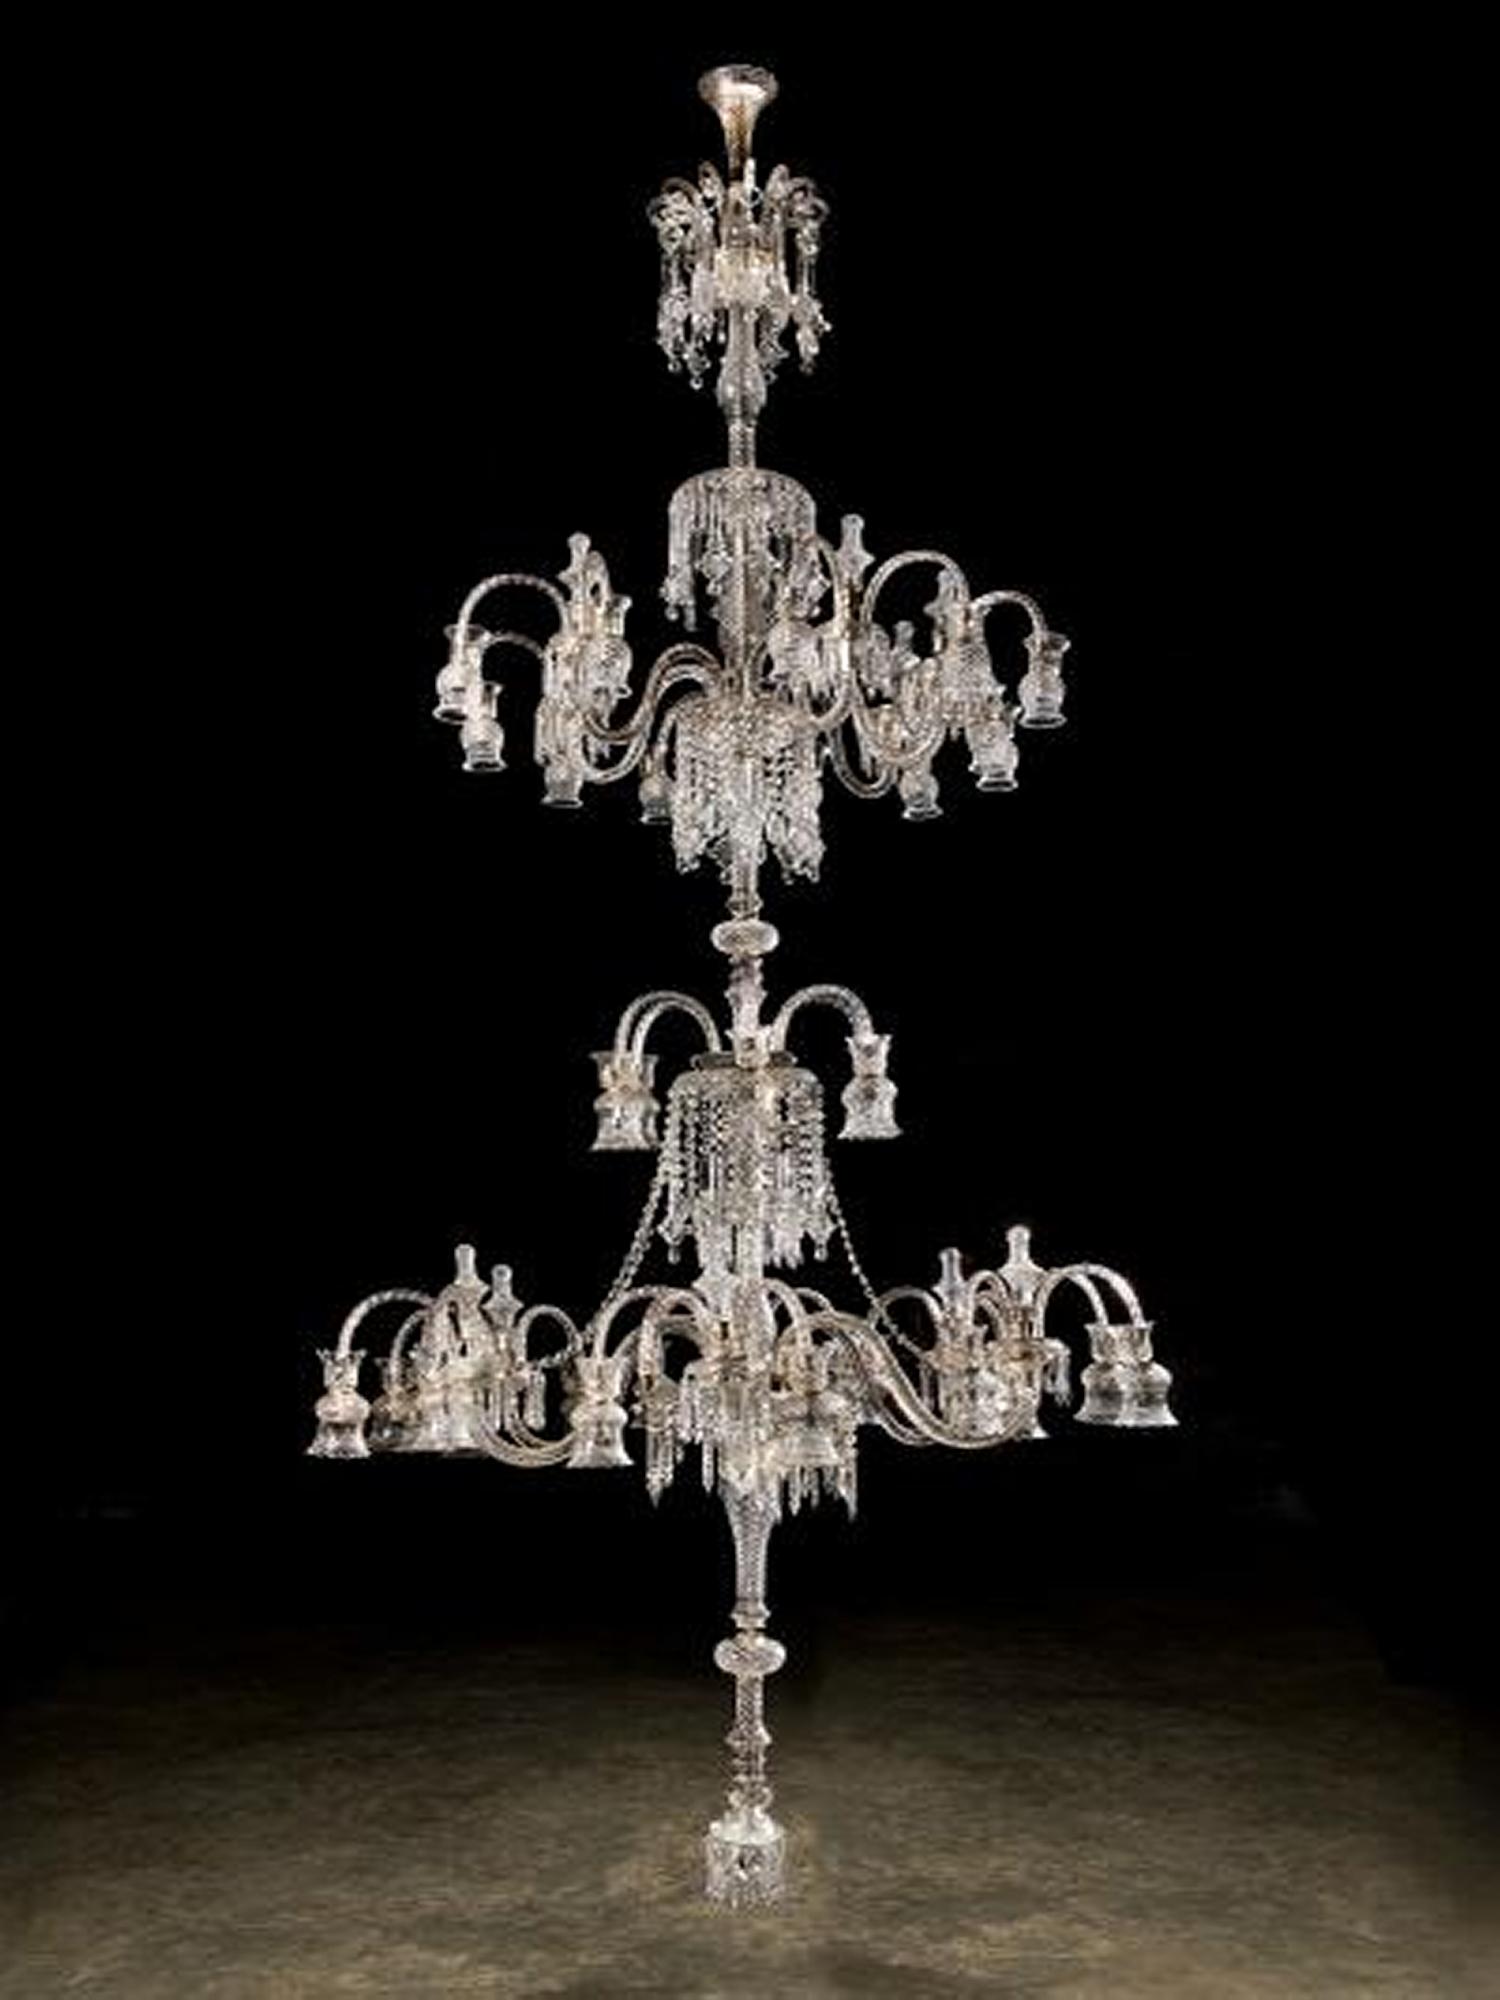 A magnificent and monumental cut glass chandelier modern 430cm high by 180cm diameter